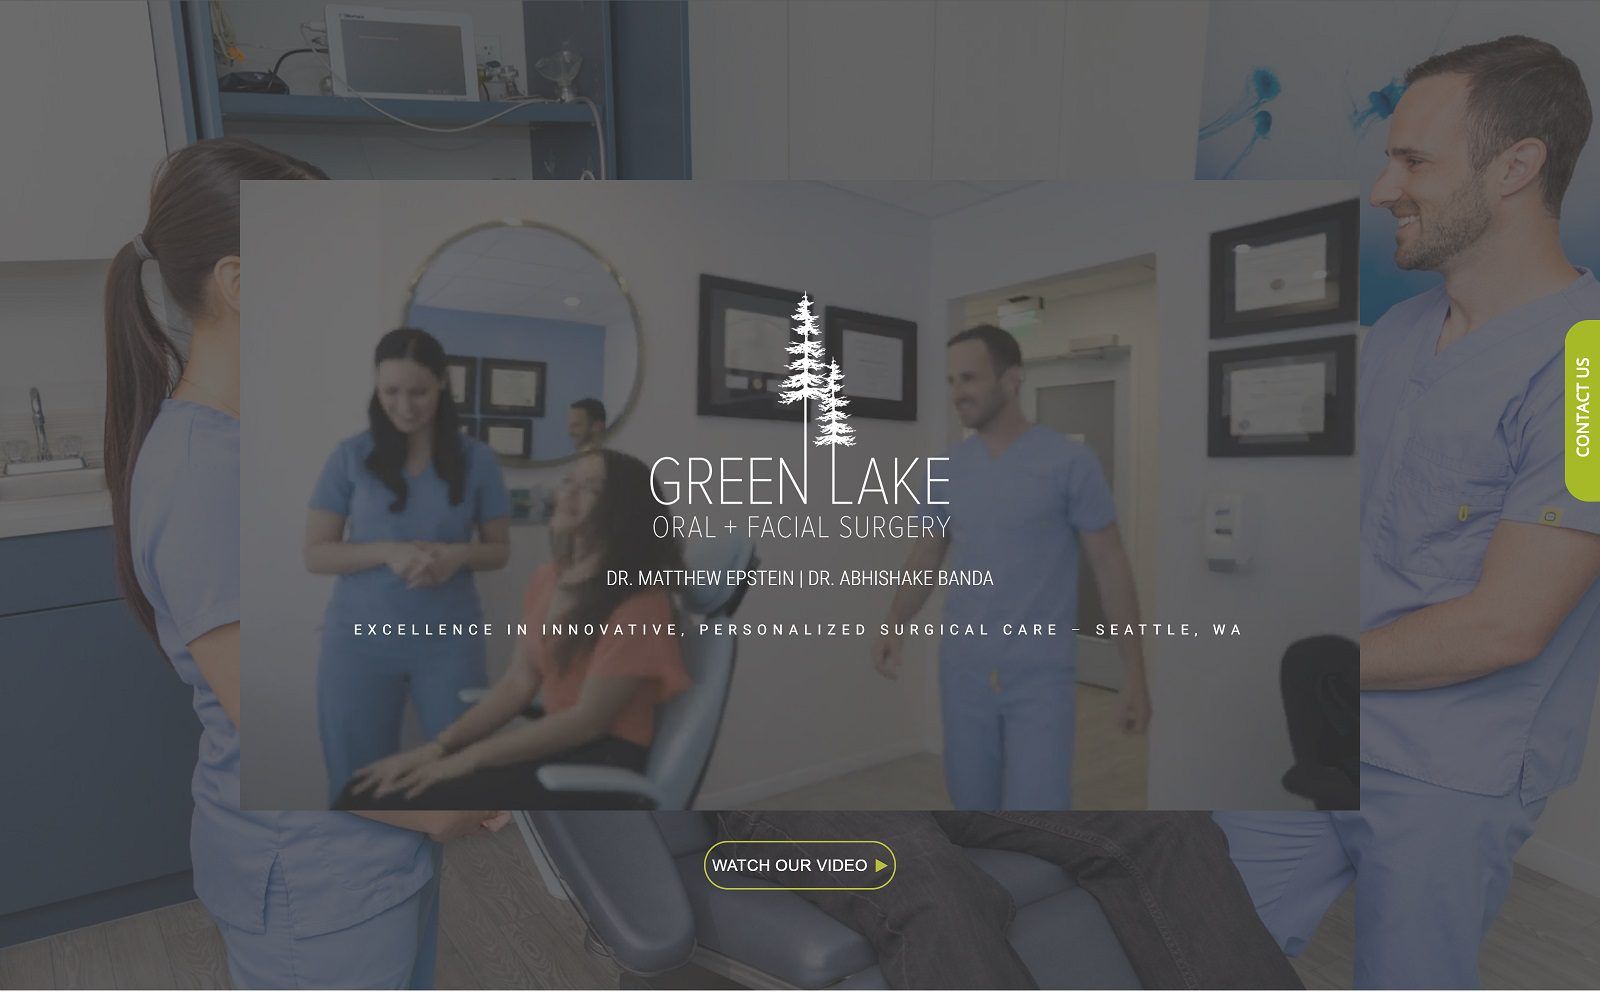 The screenshot of green lake oral and facial surgery: dr matthew epstein website